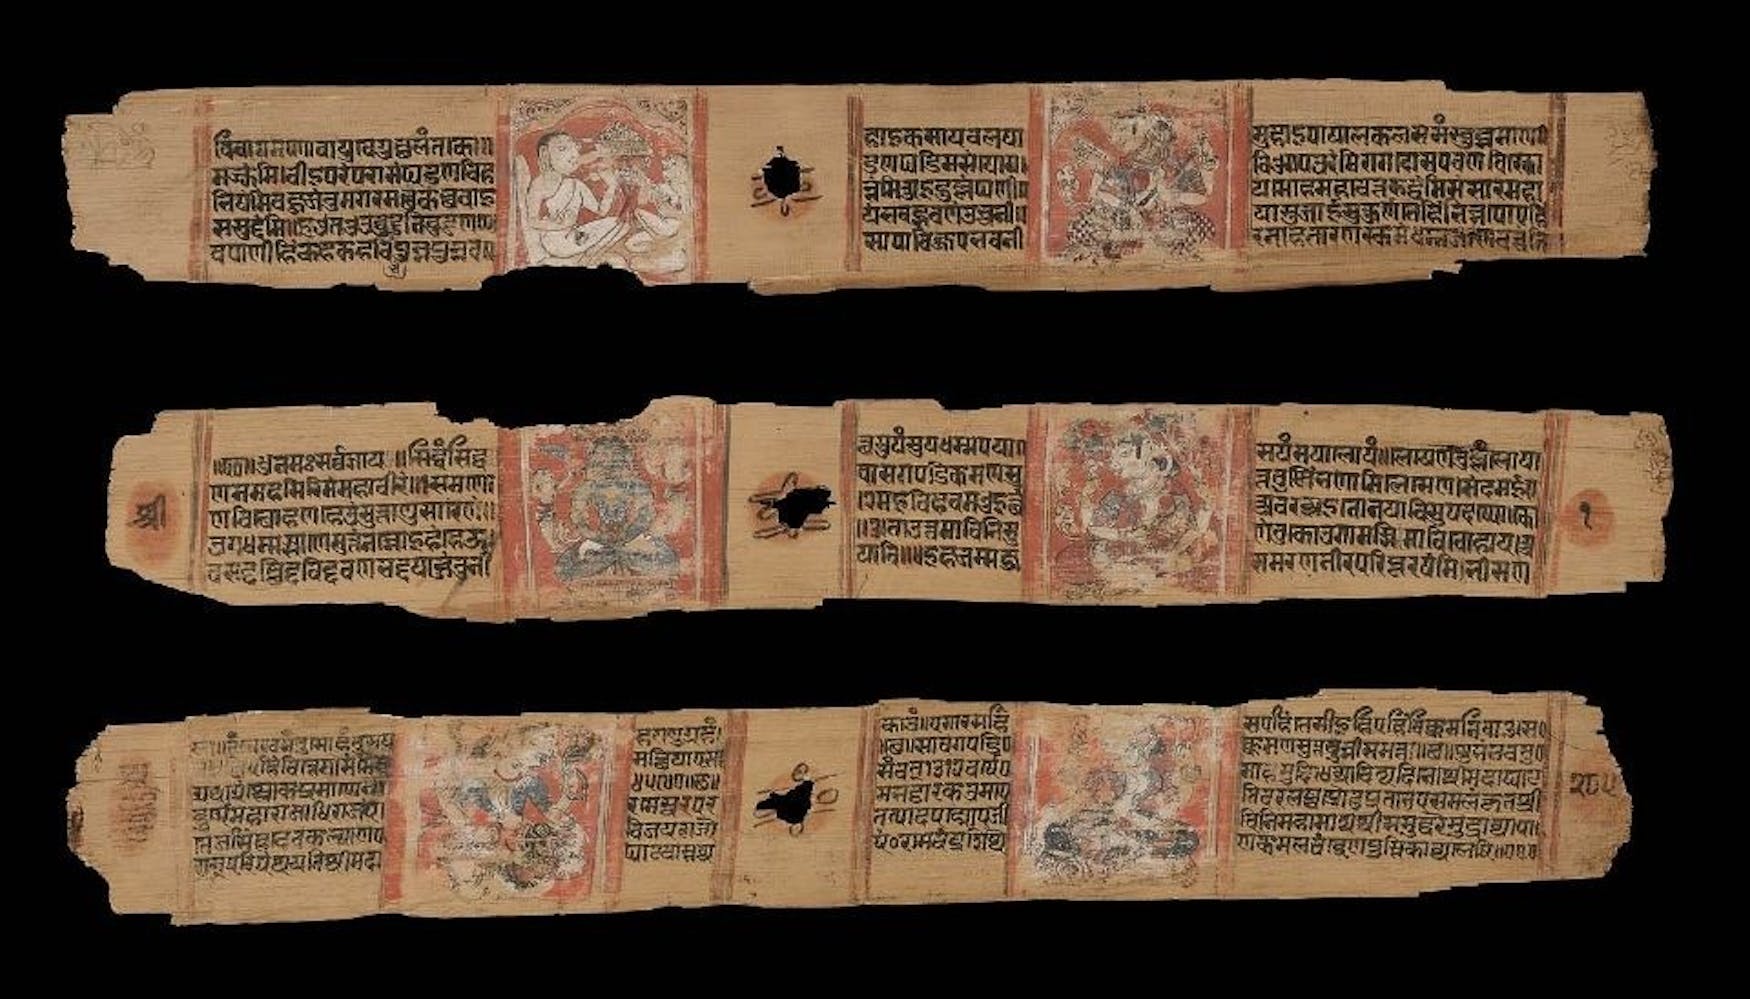 HIDDEN TREASURES: Pure Souls: The Jain Path to Perfection displays Jain illuminated manuscripts such as the one above.